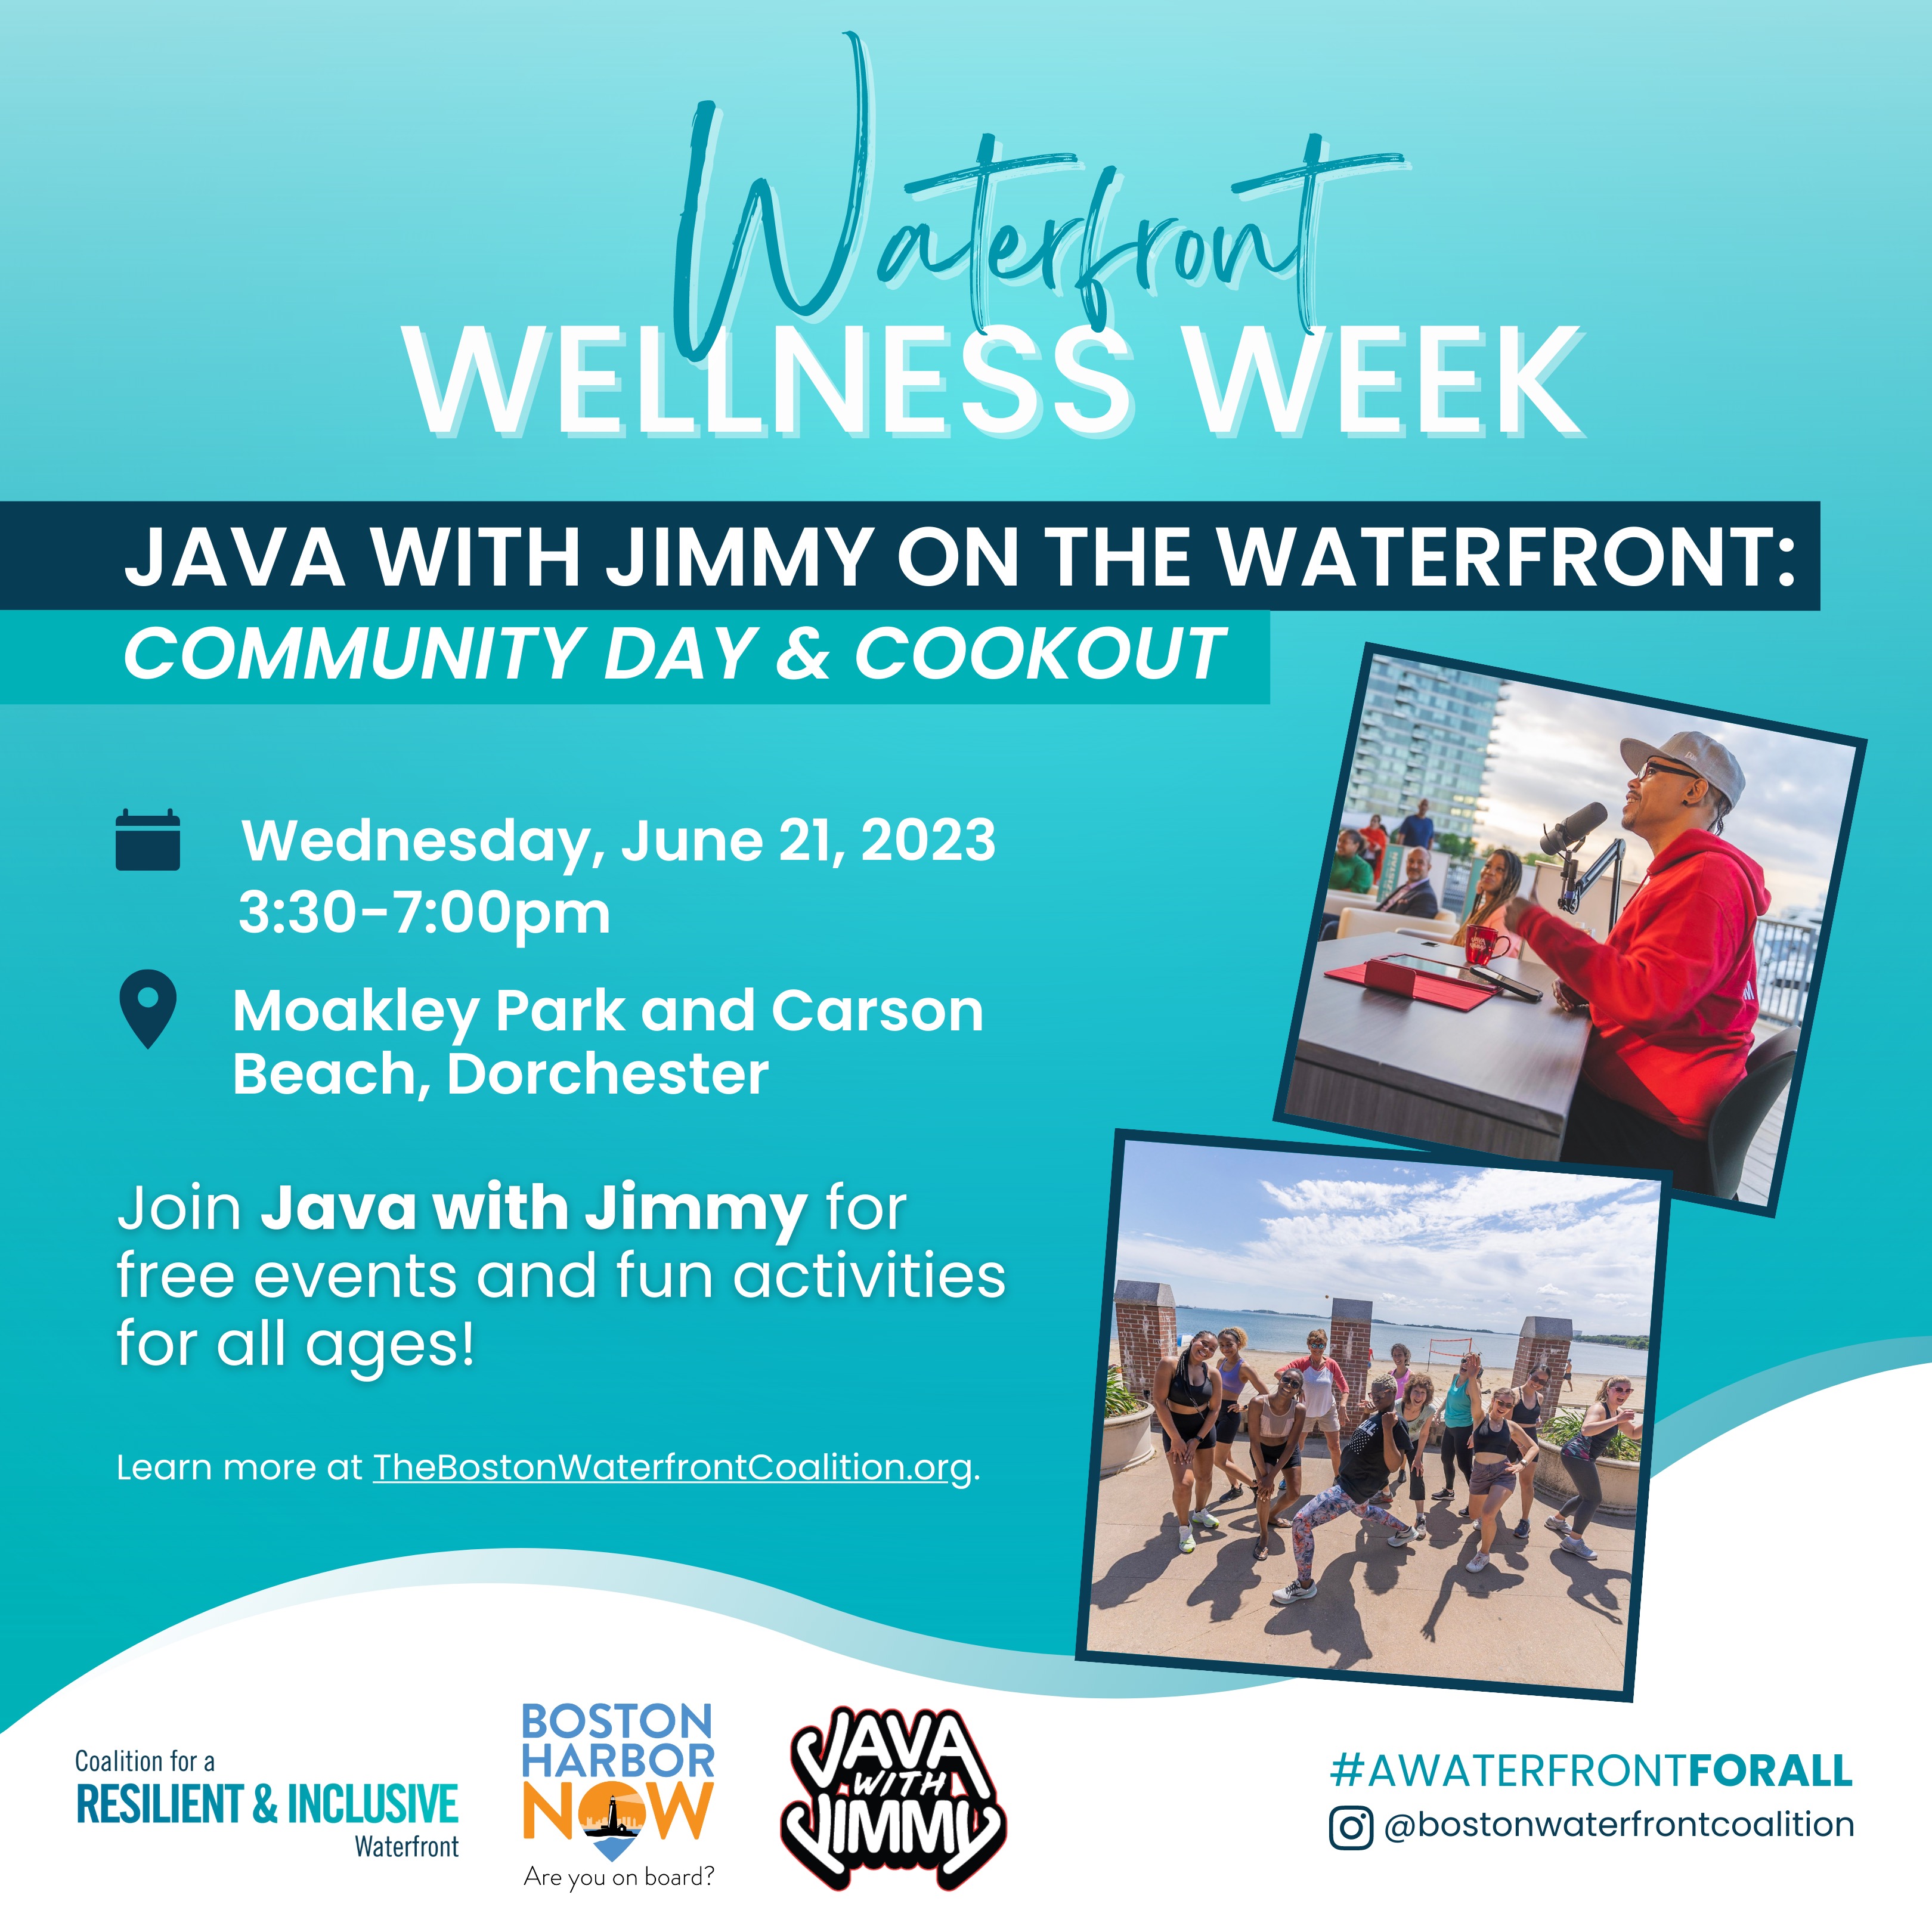 Java with Jimmy On the Waterfront: Community Day & Cookout